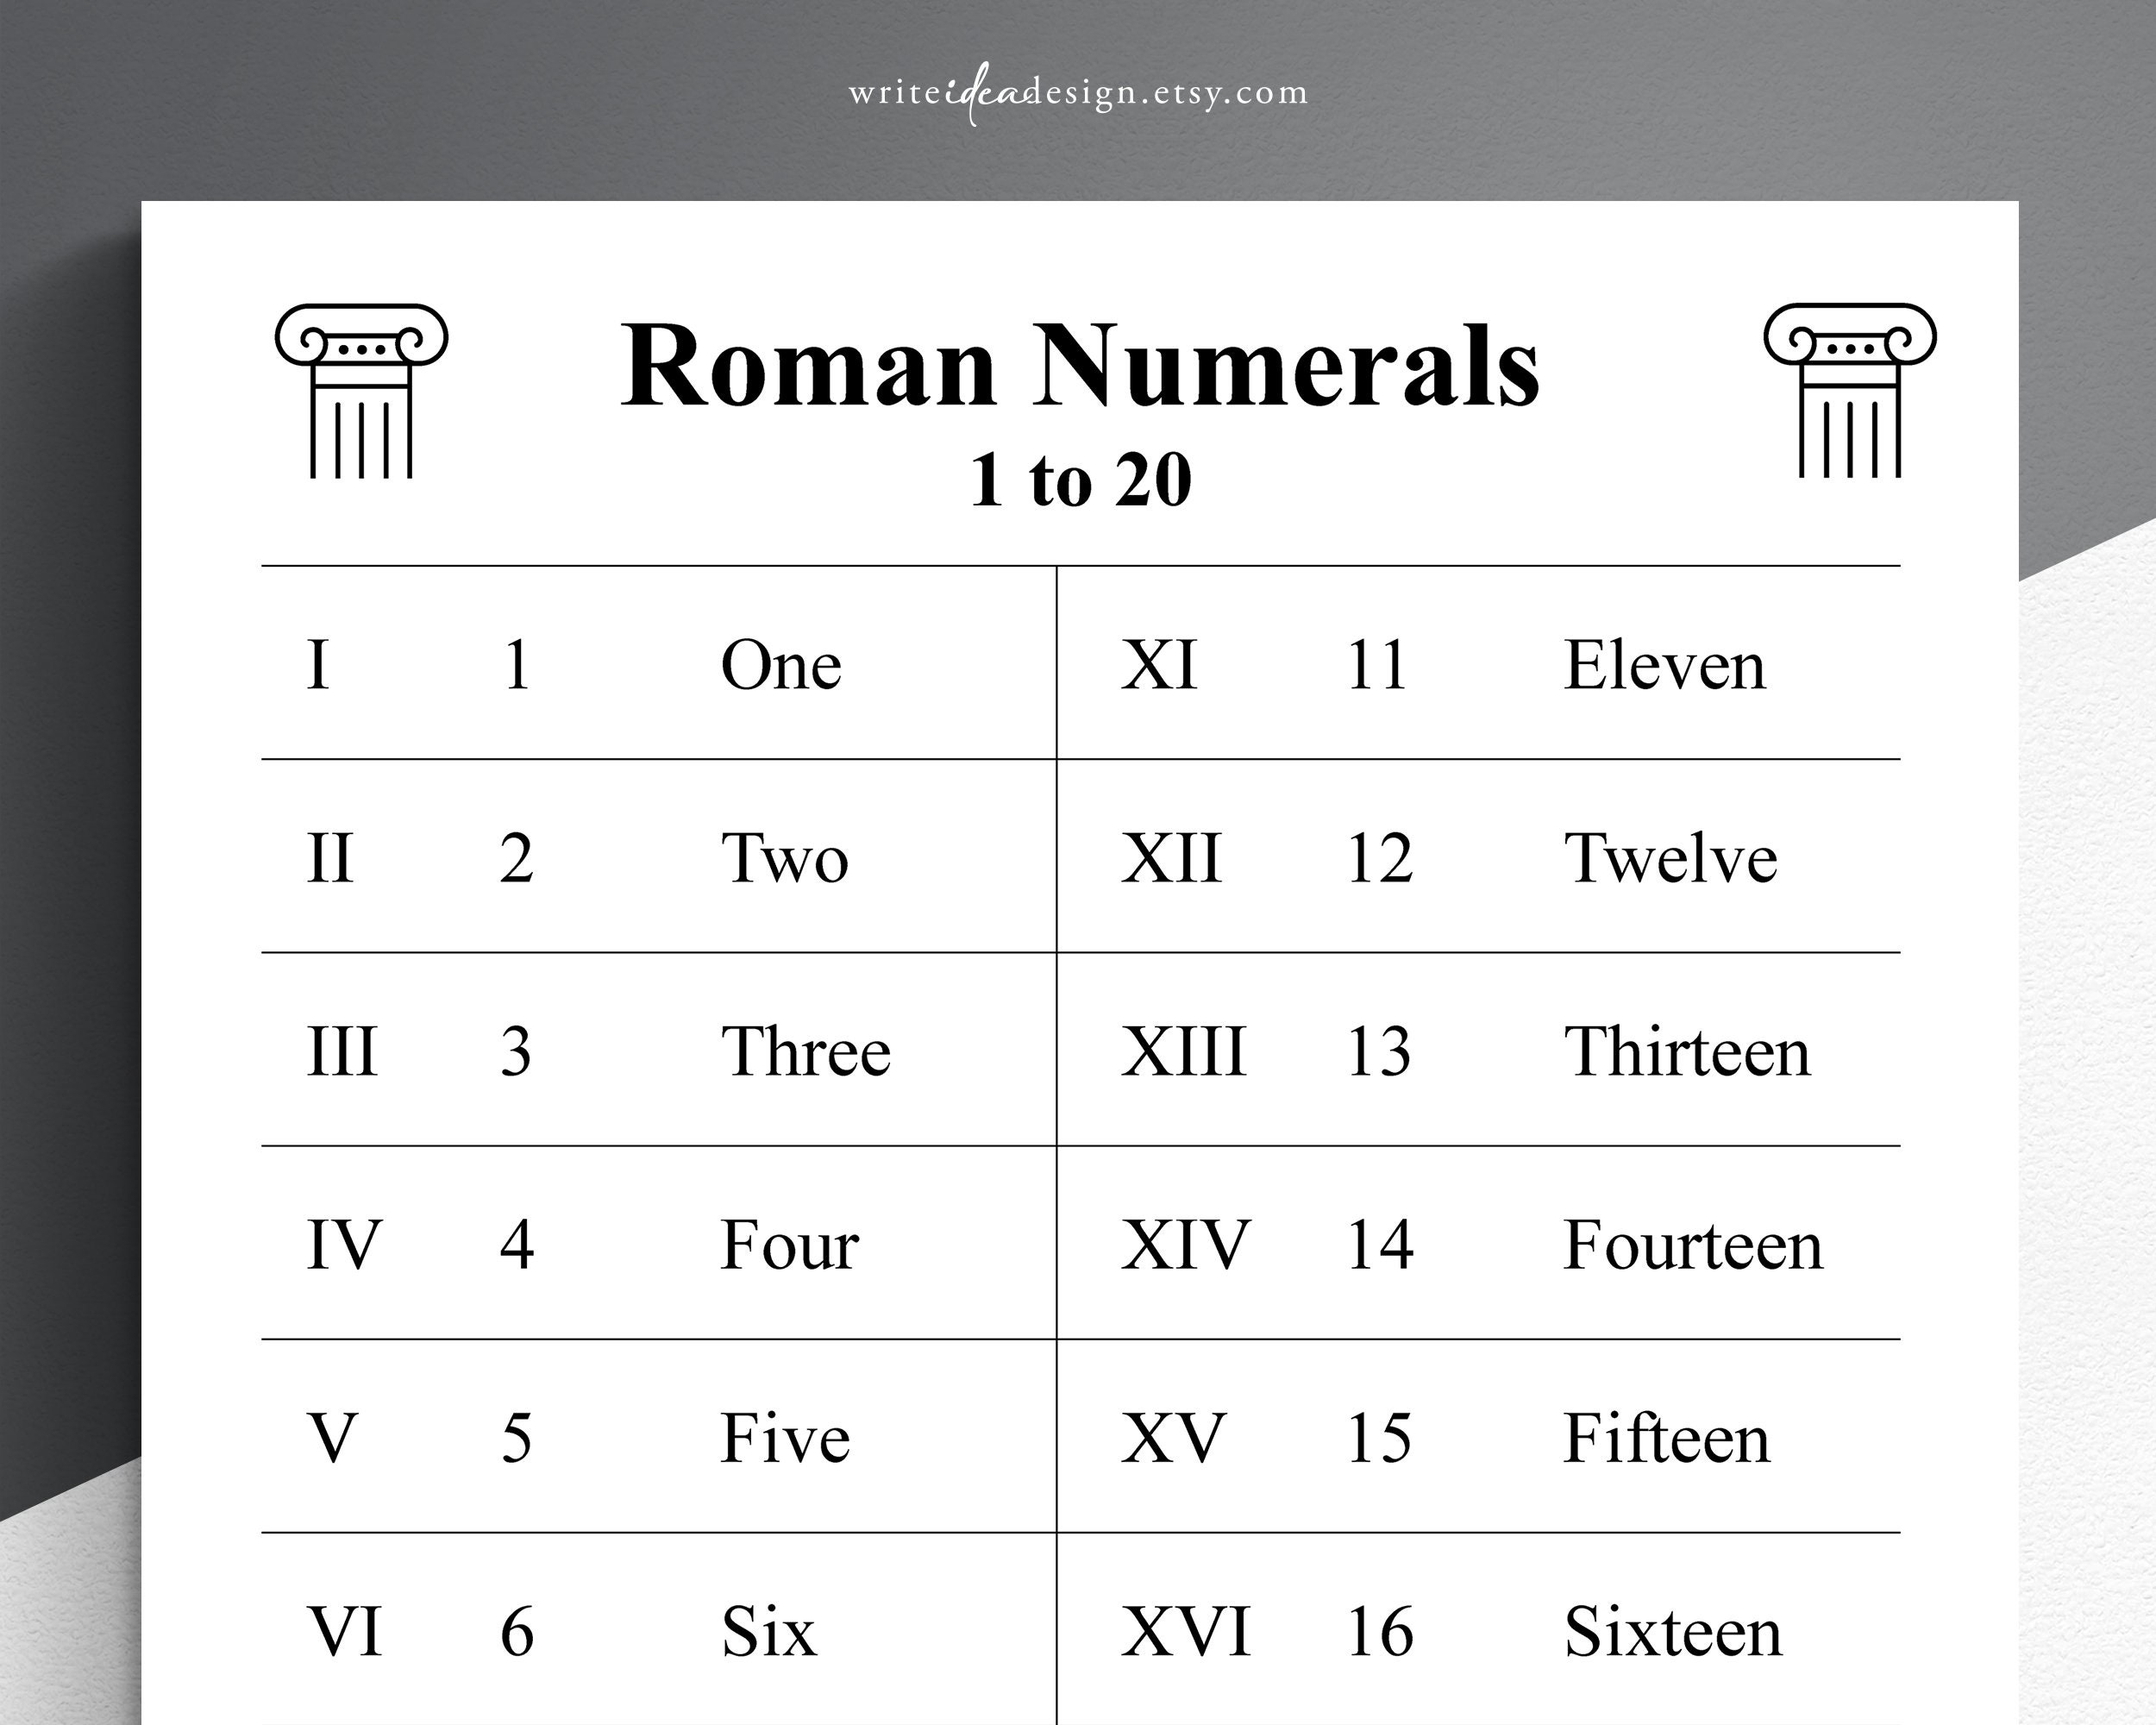 Roman Numerals 1 Art Board Print for Sale by Yorkie2105